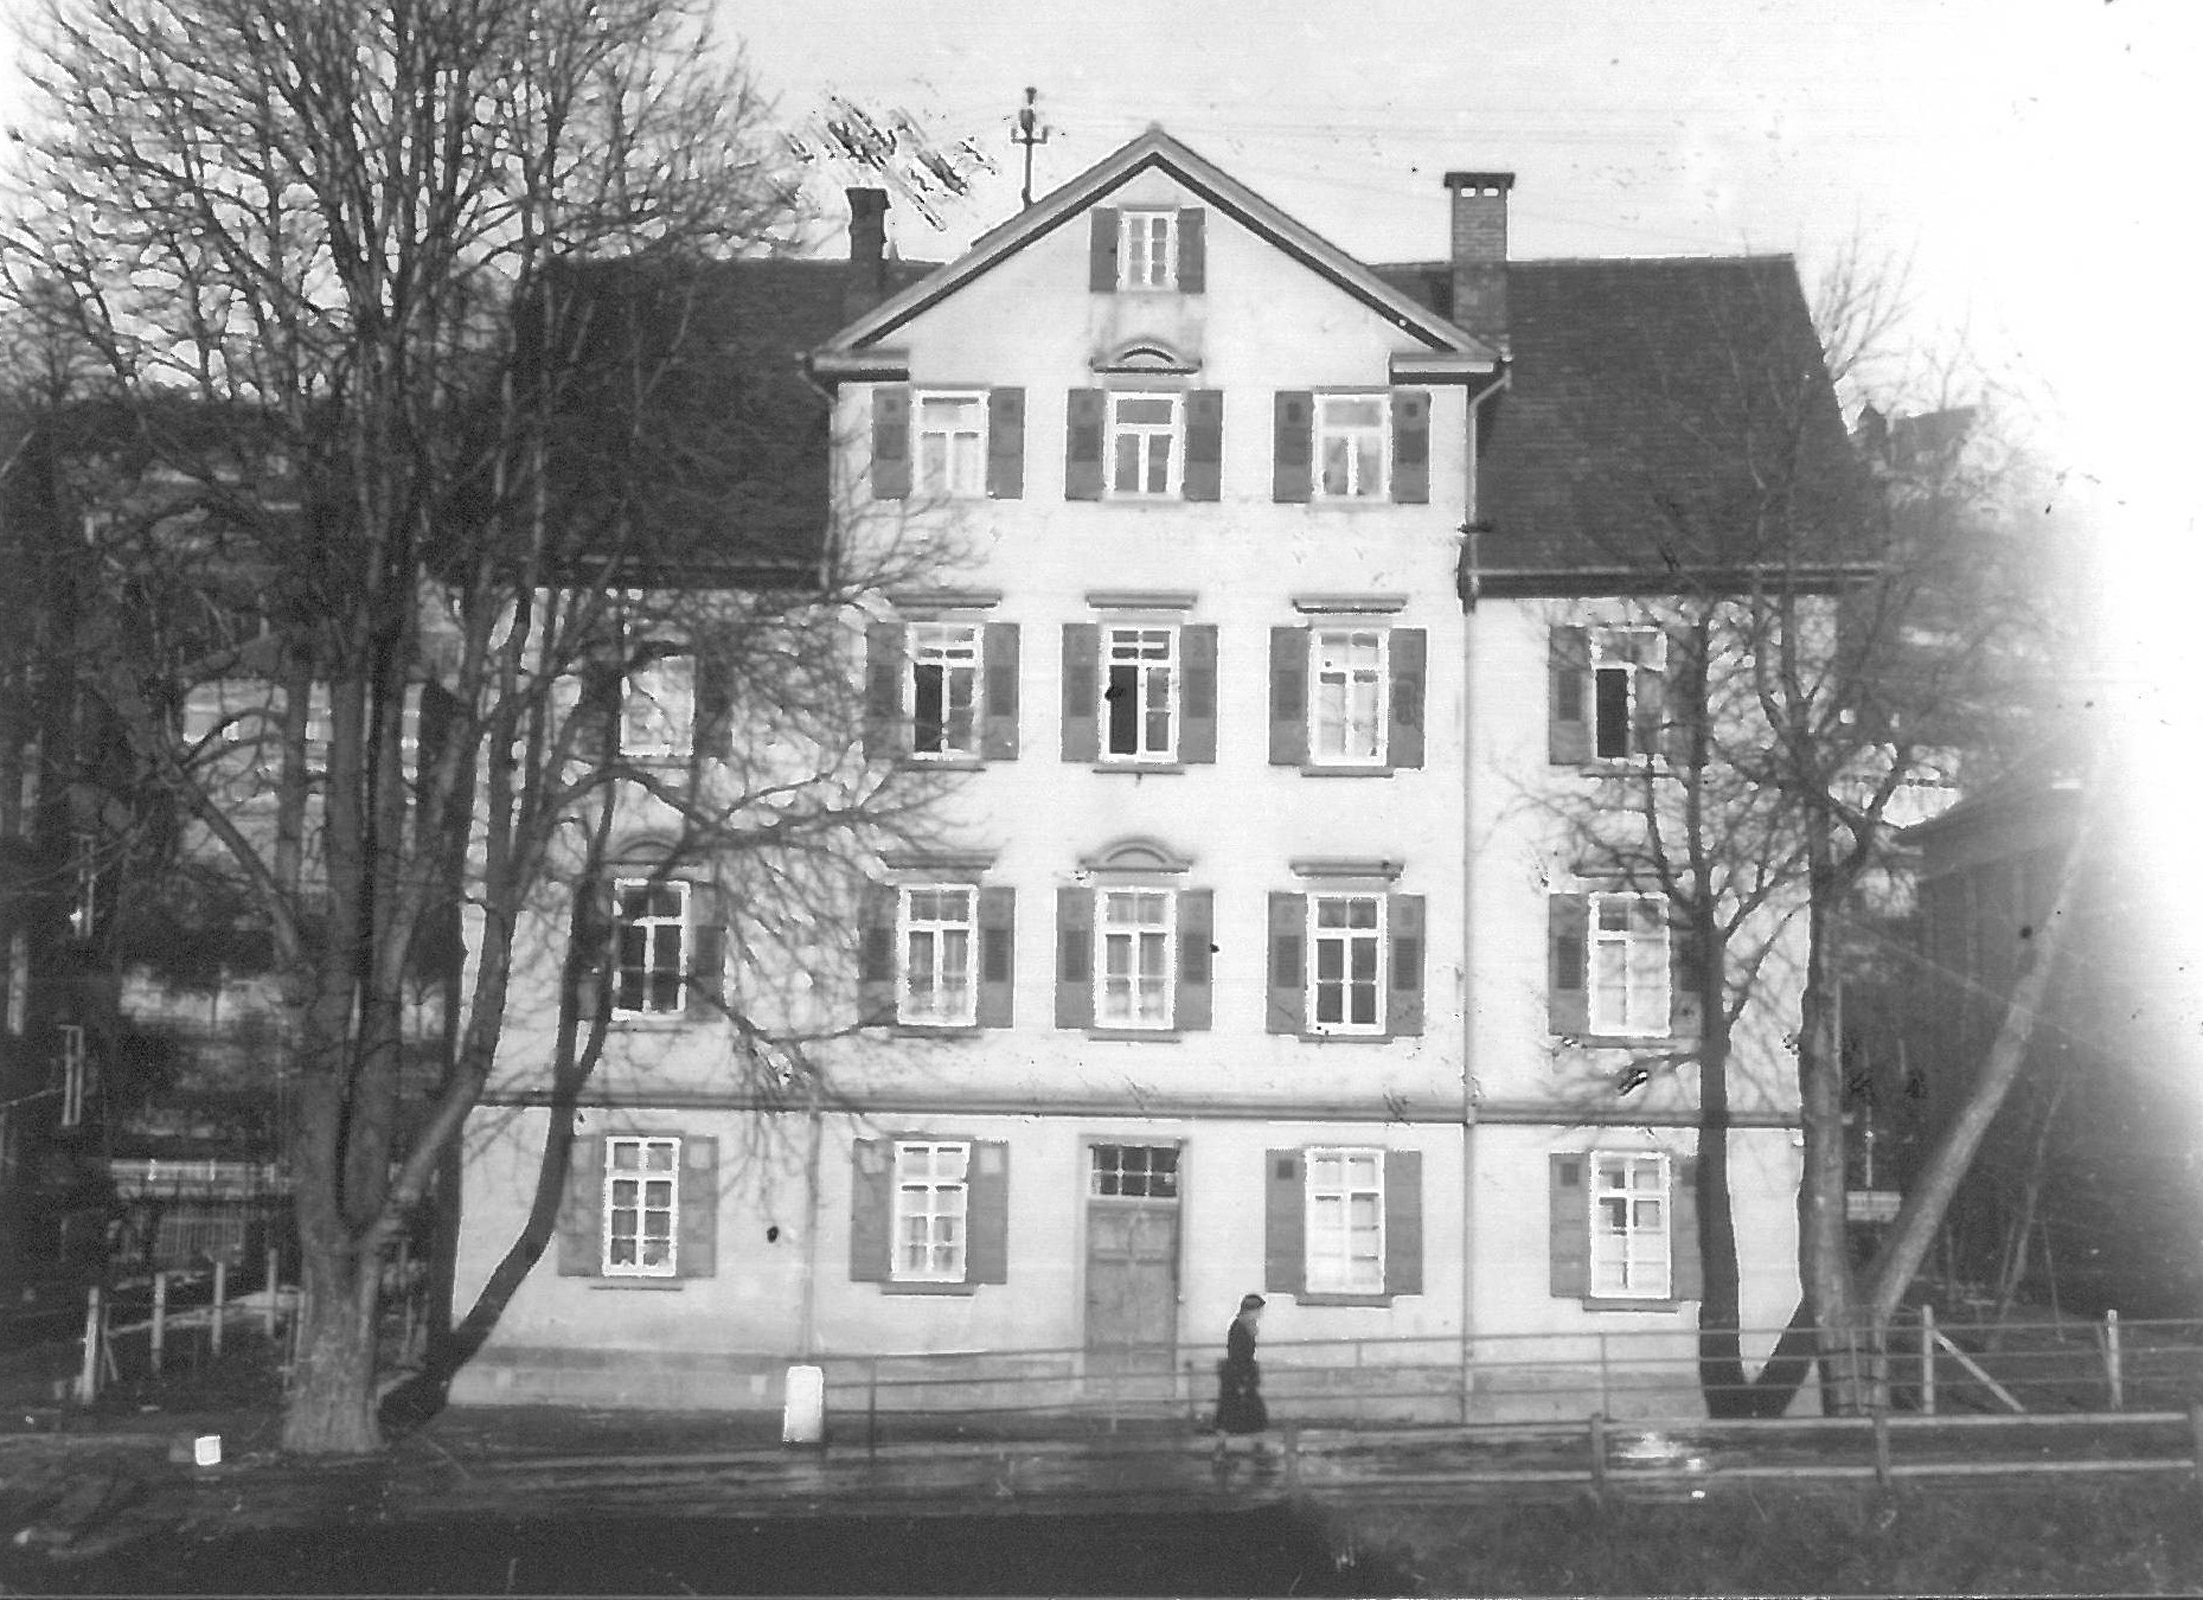 The family home at Wöhrdstrasse 23.